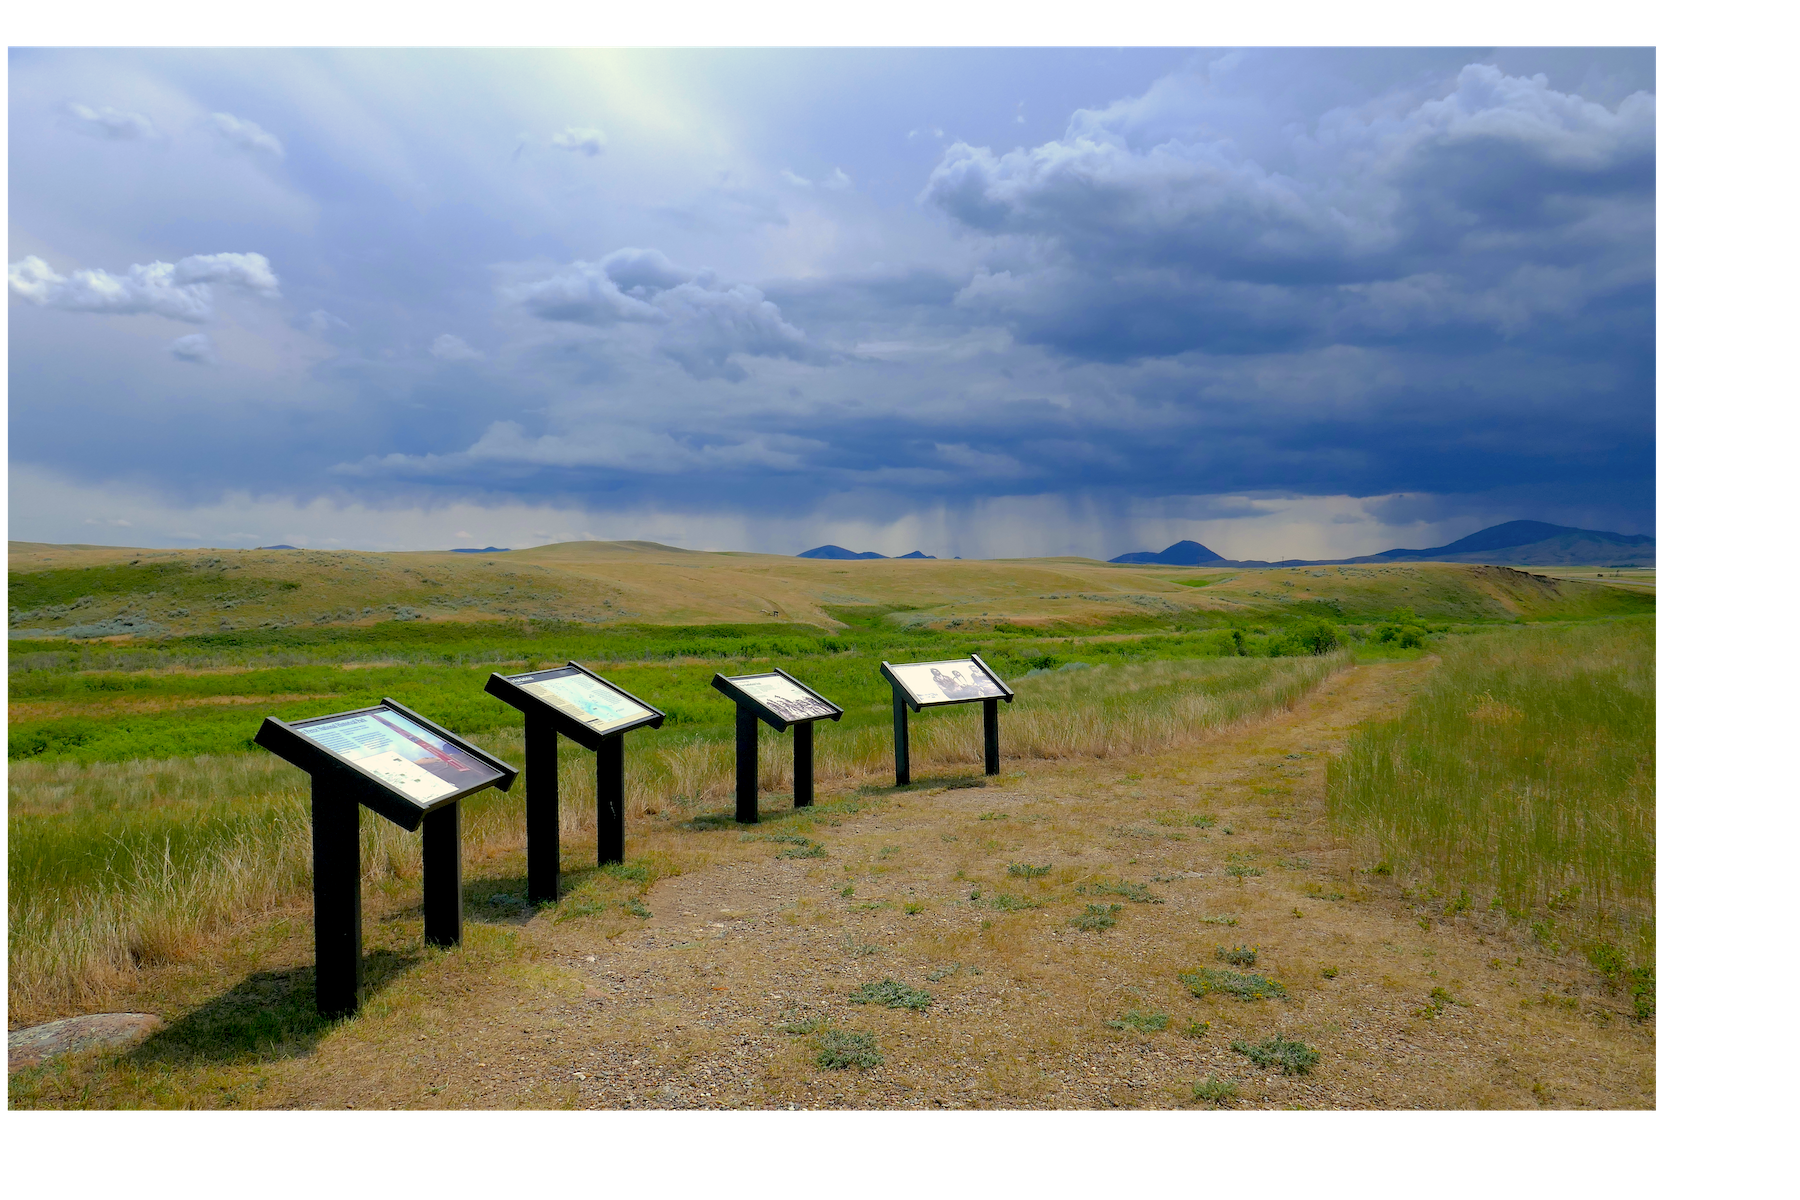 Four wayside signs are posted on a grassy hill overlooking the battlefield.